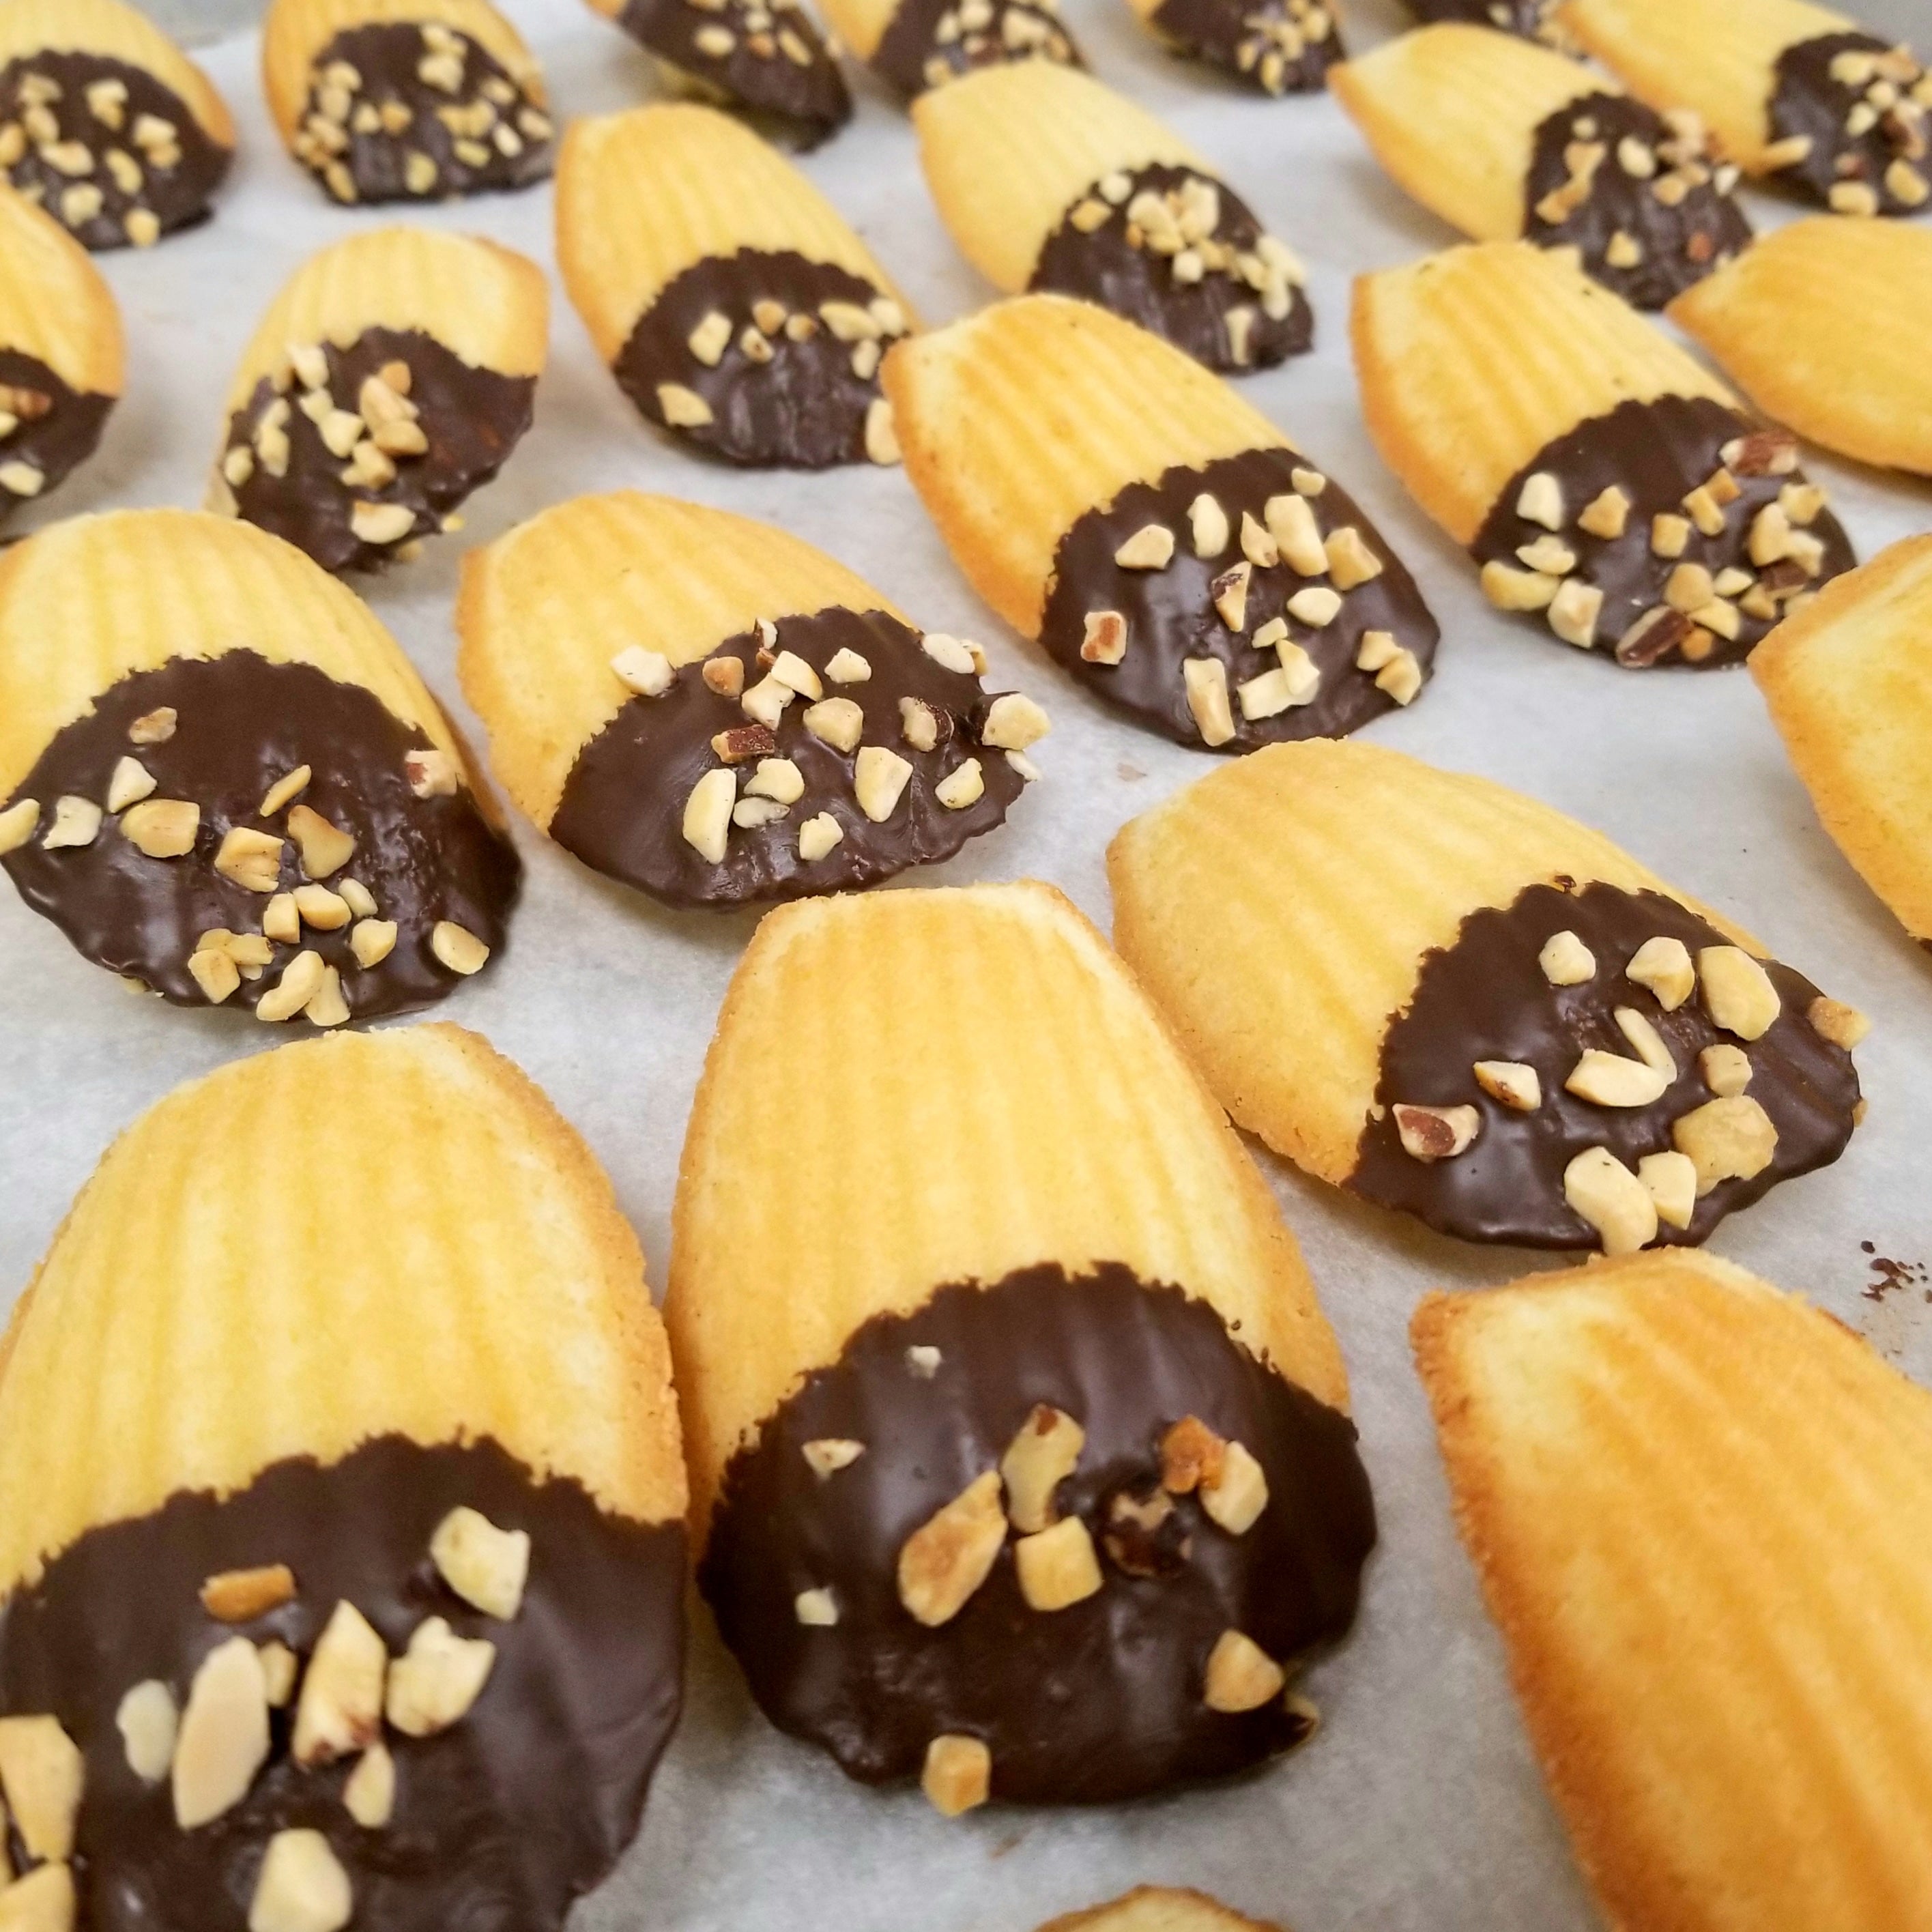 madeleine cookies dipped in chocolate topped with nuts